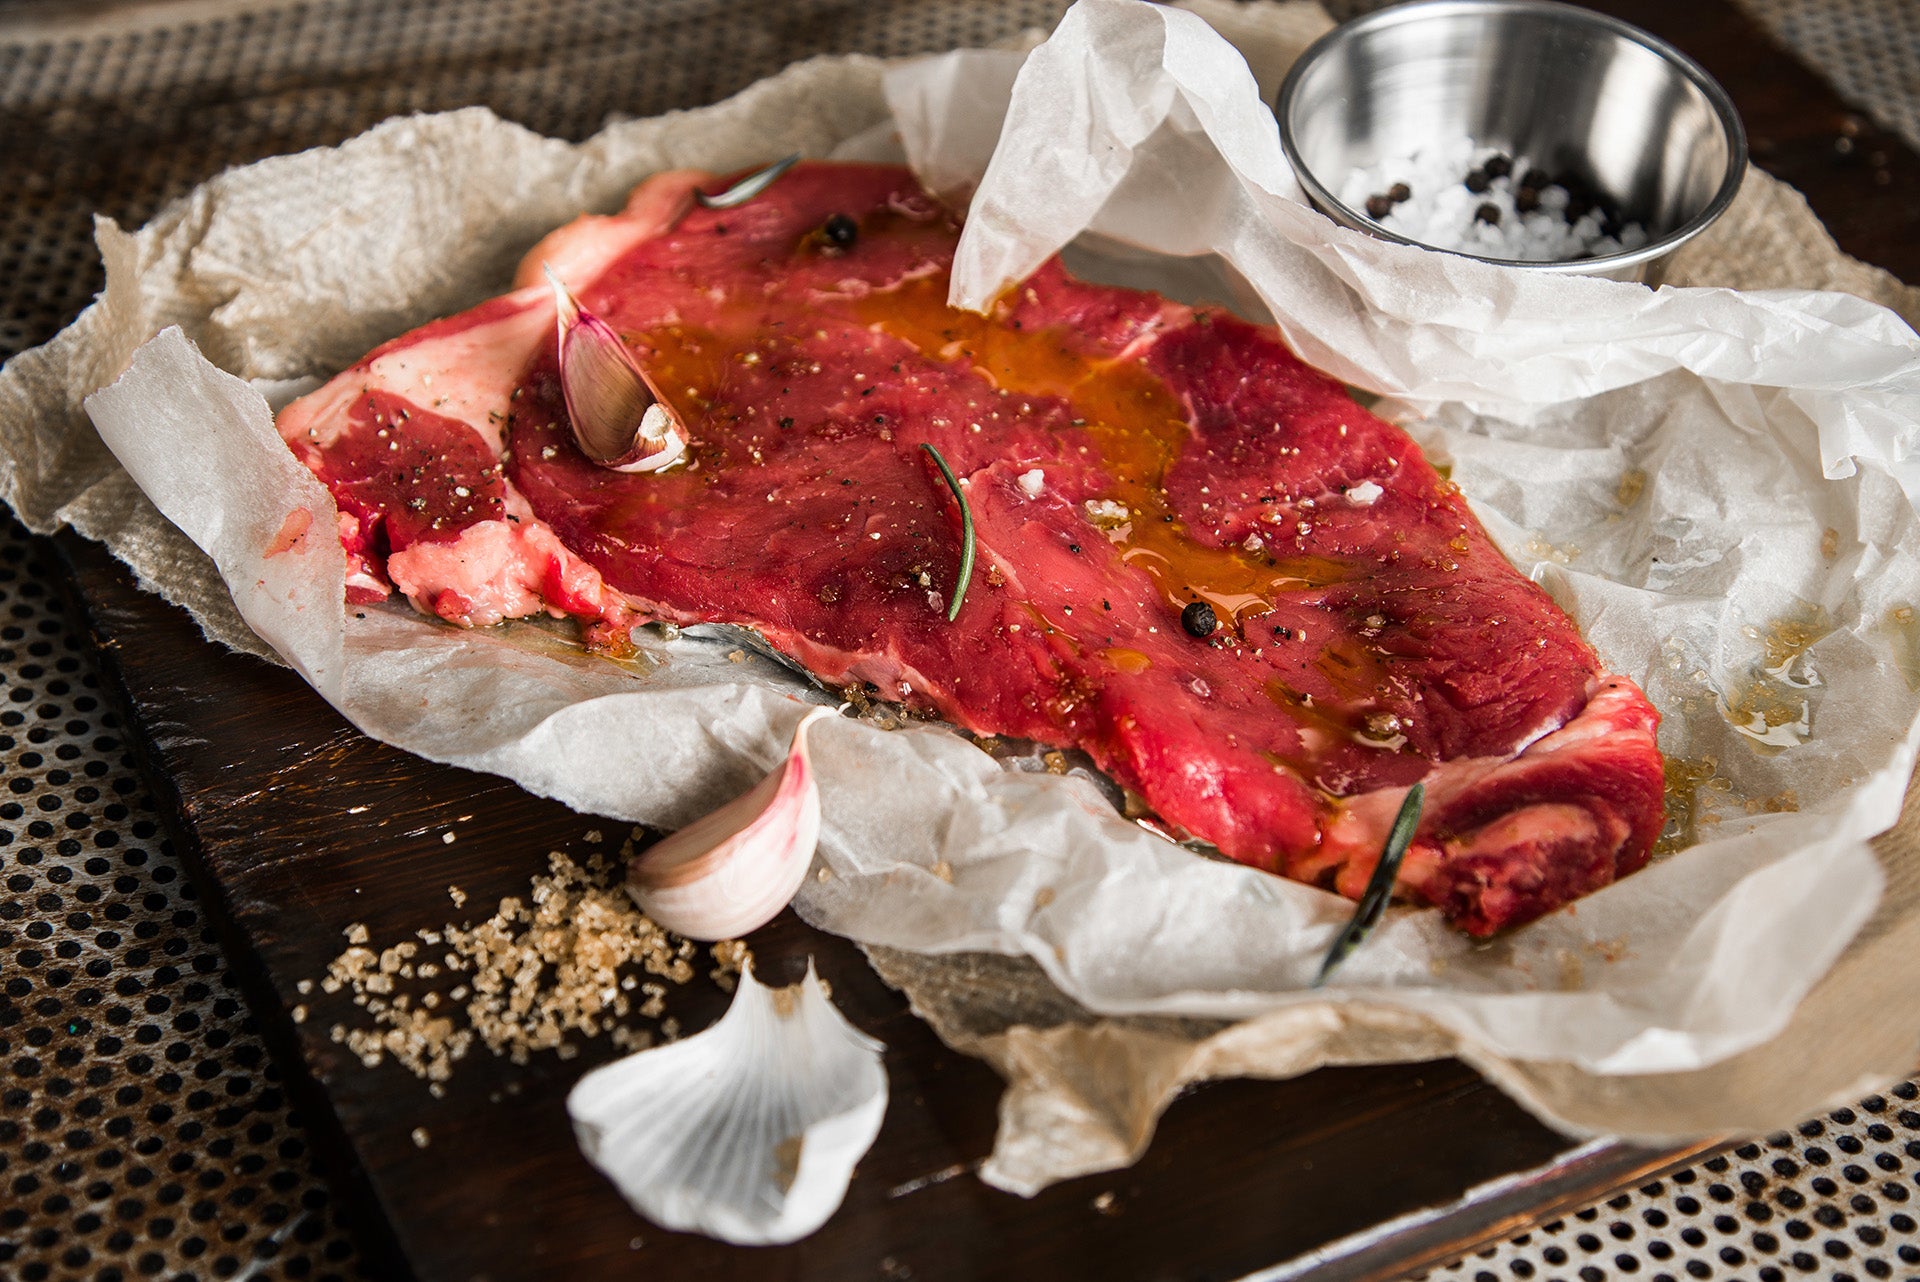 Raw meat pieces on wooden cutting board with oil, spices, marinade